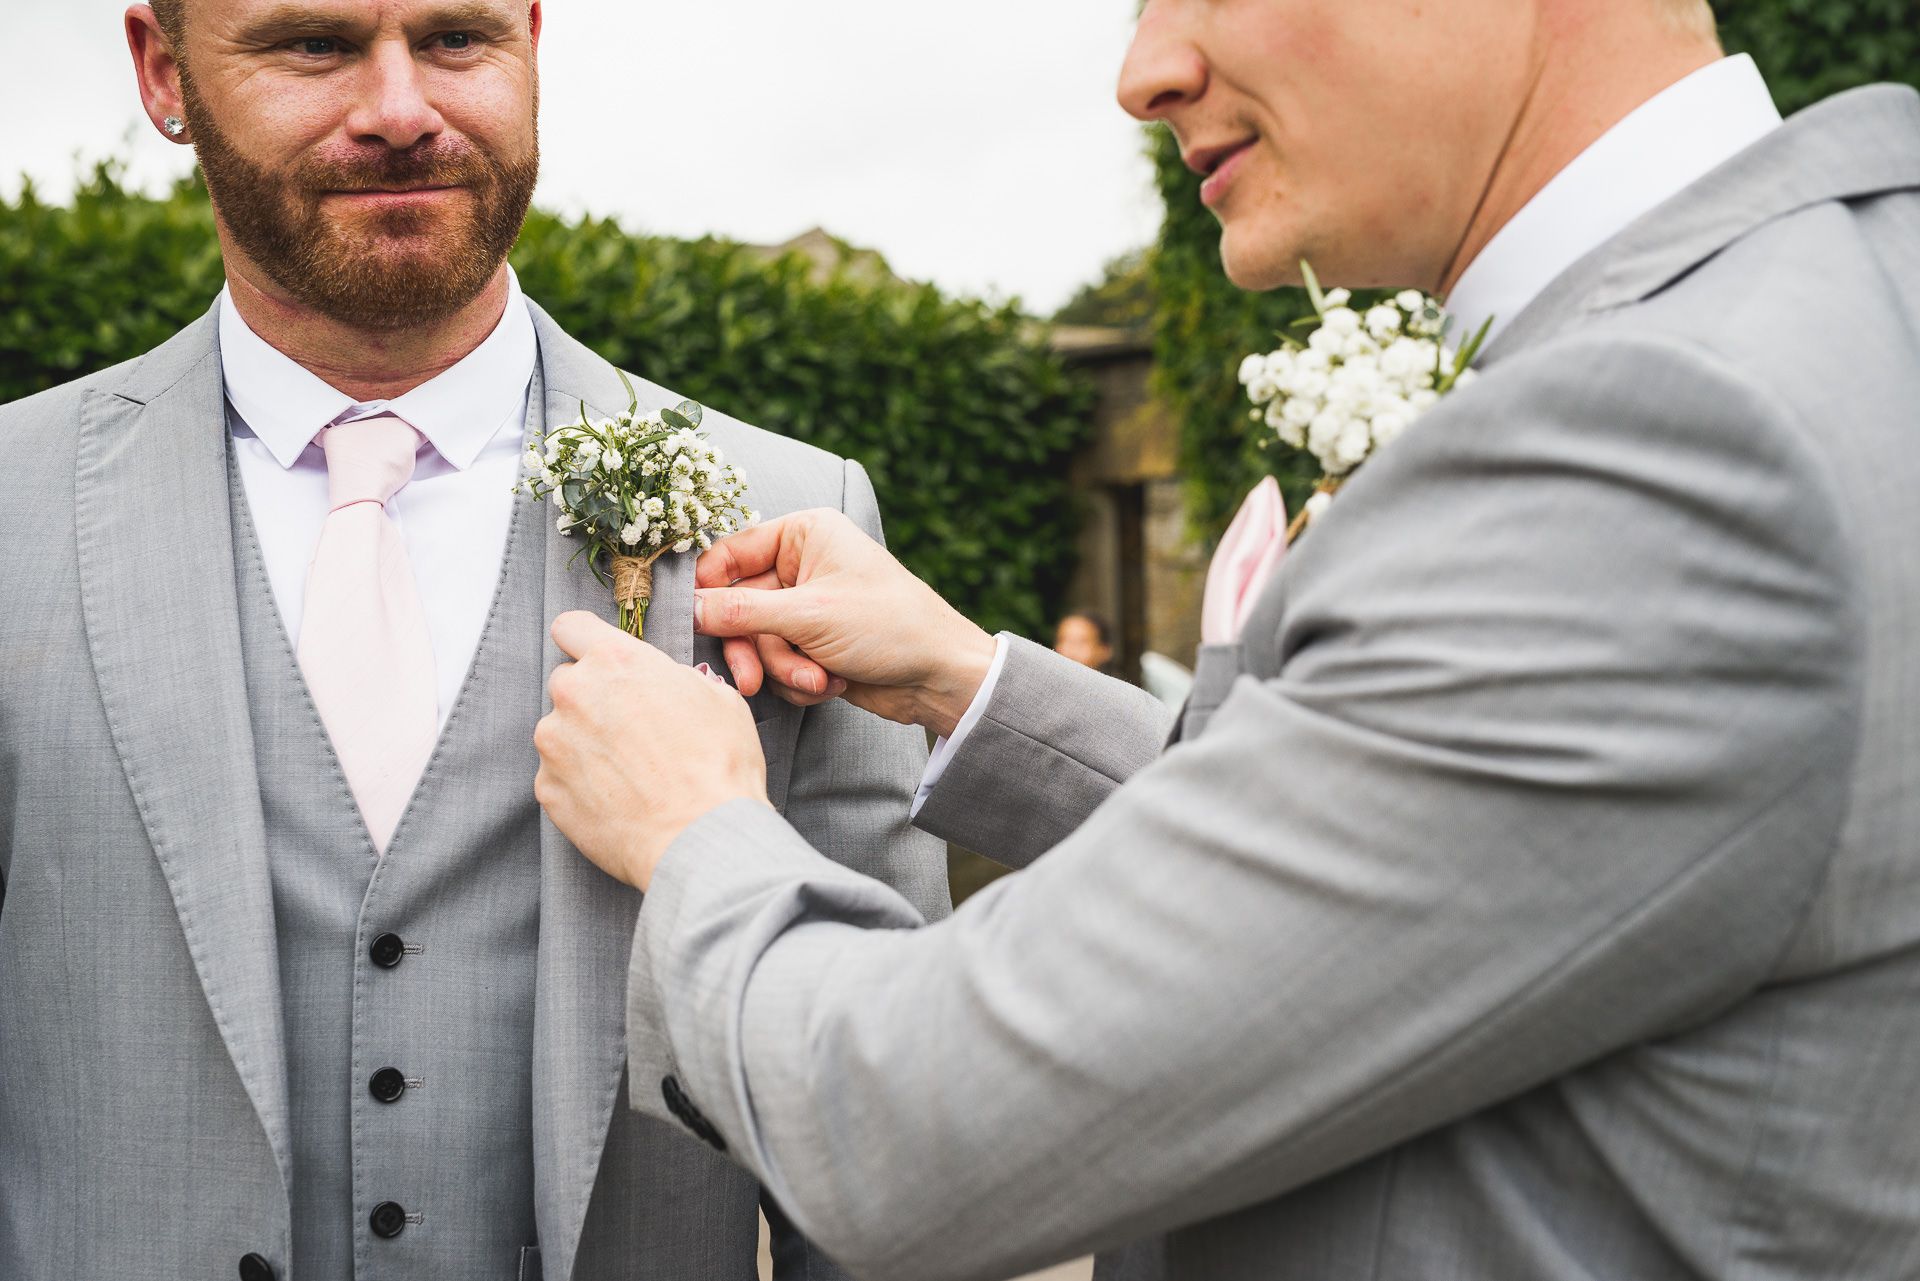 the best man attaches the groom's buttonhole flower